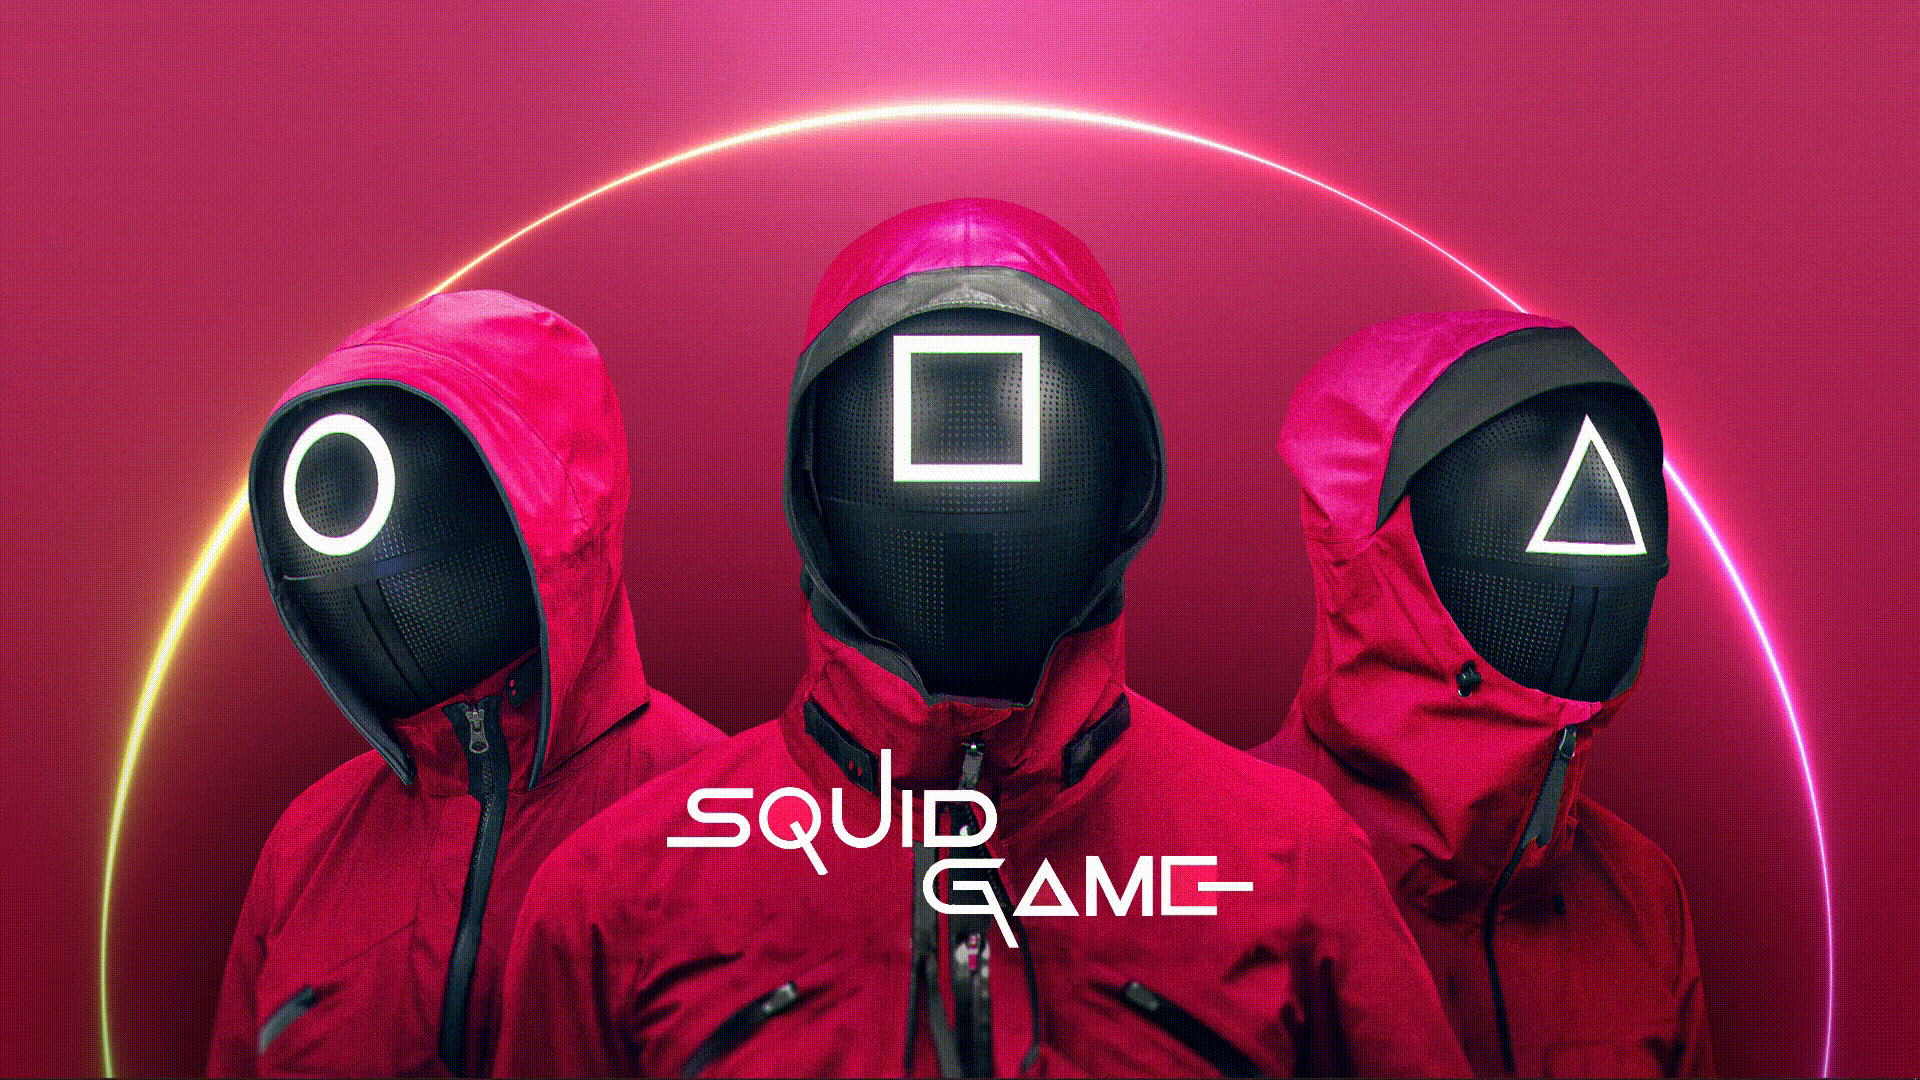 Squid Game Animated Audio Responsive Wallpaper by ParzivalV on DeviantArt